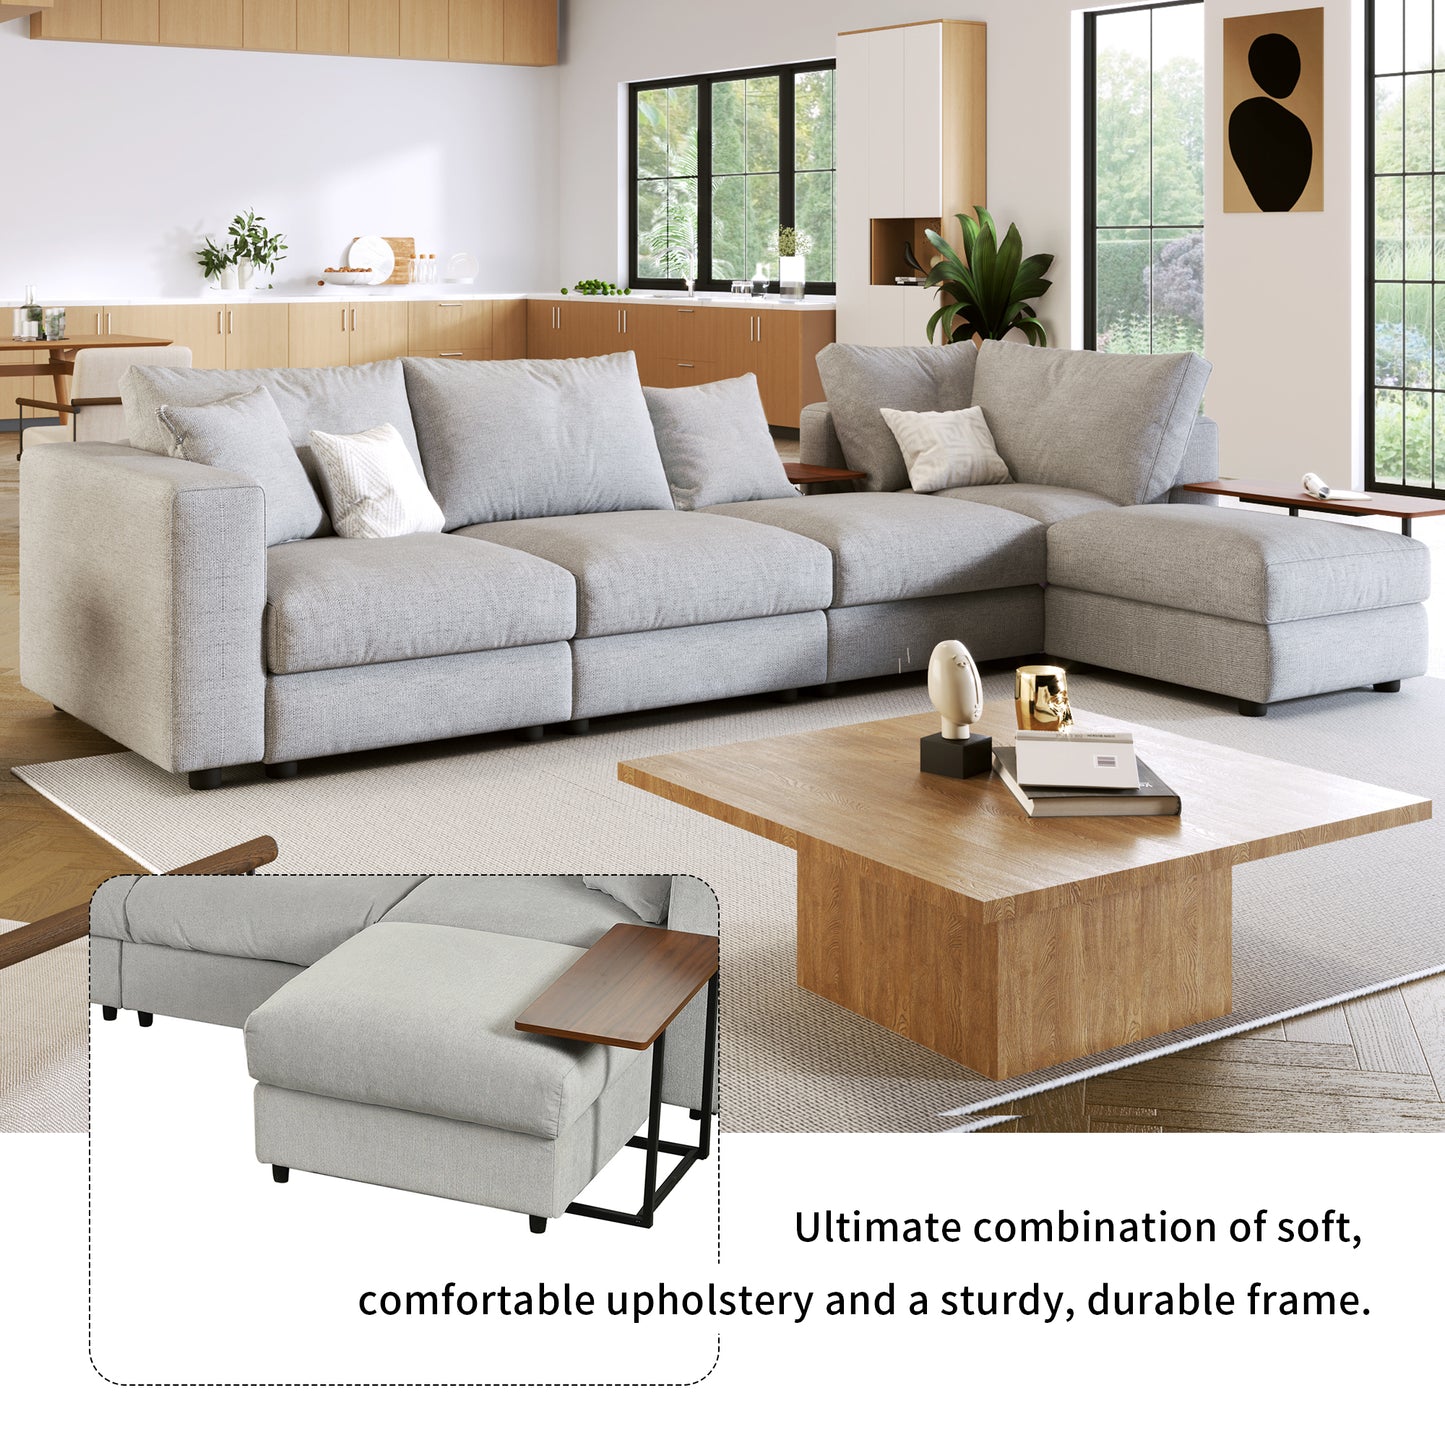 U_STYLE Modern Large L-Shape Sectional Sofa for Living Room, 2 Pillows and 2 End Tables